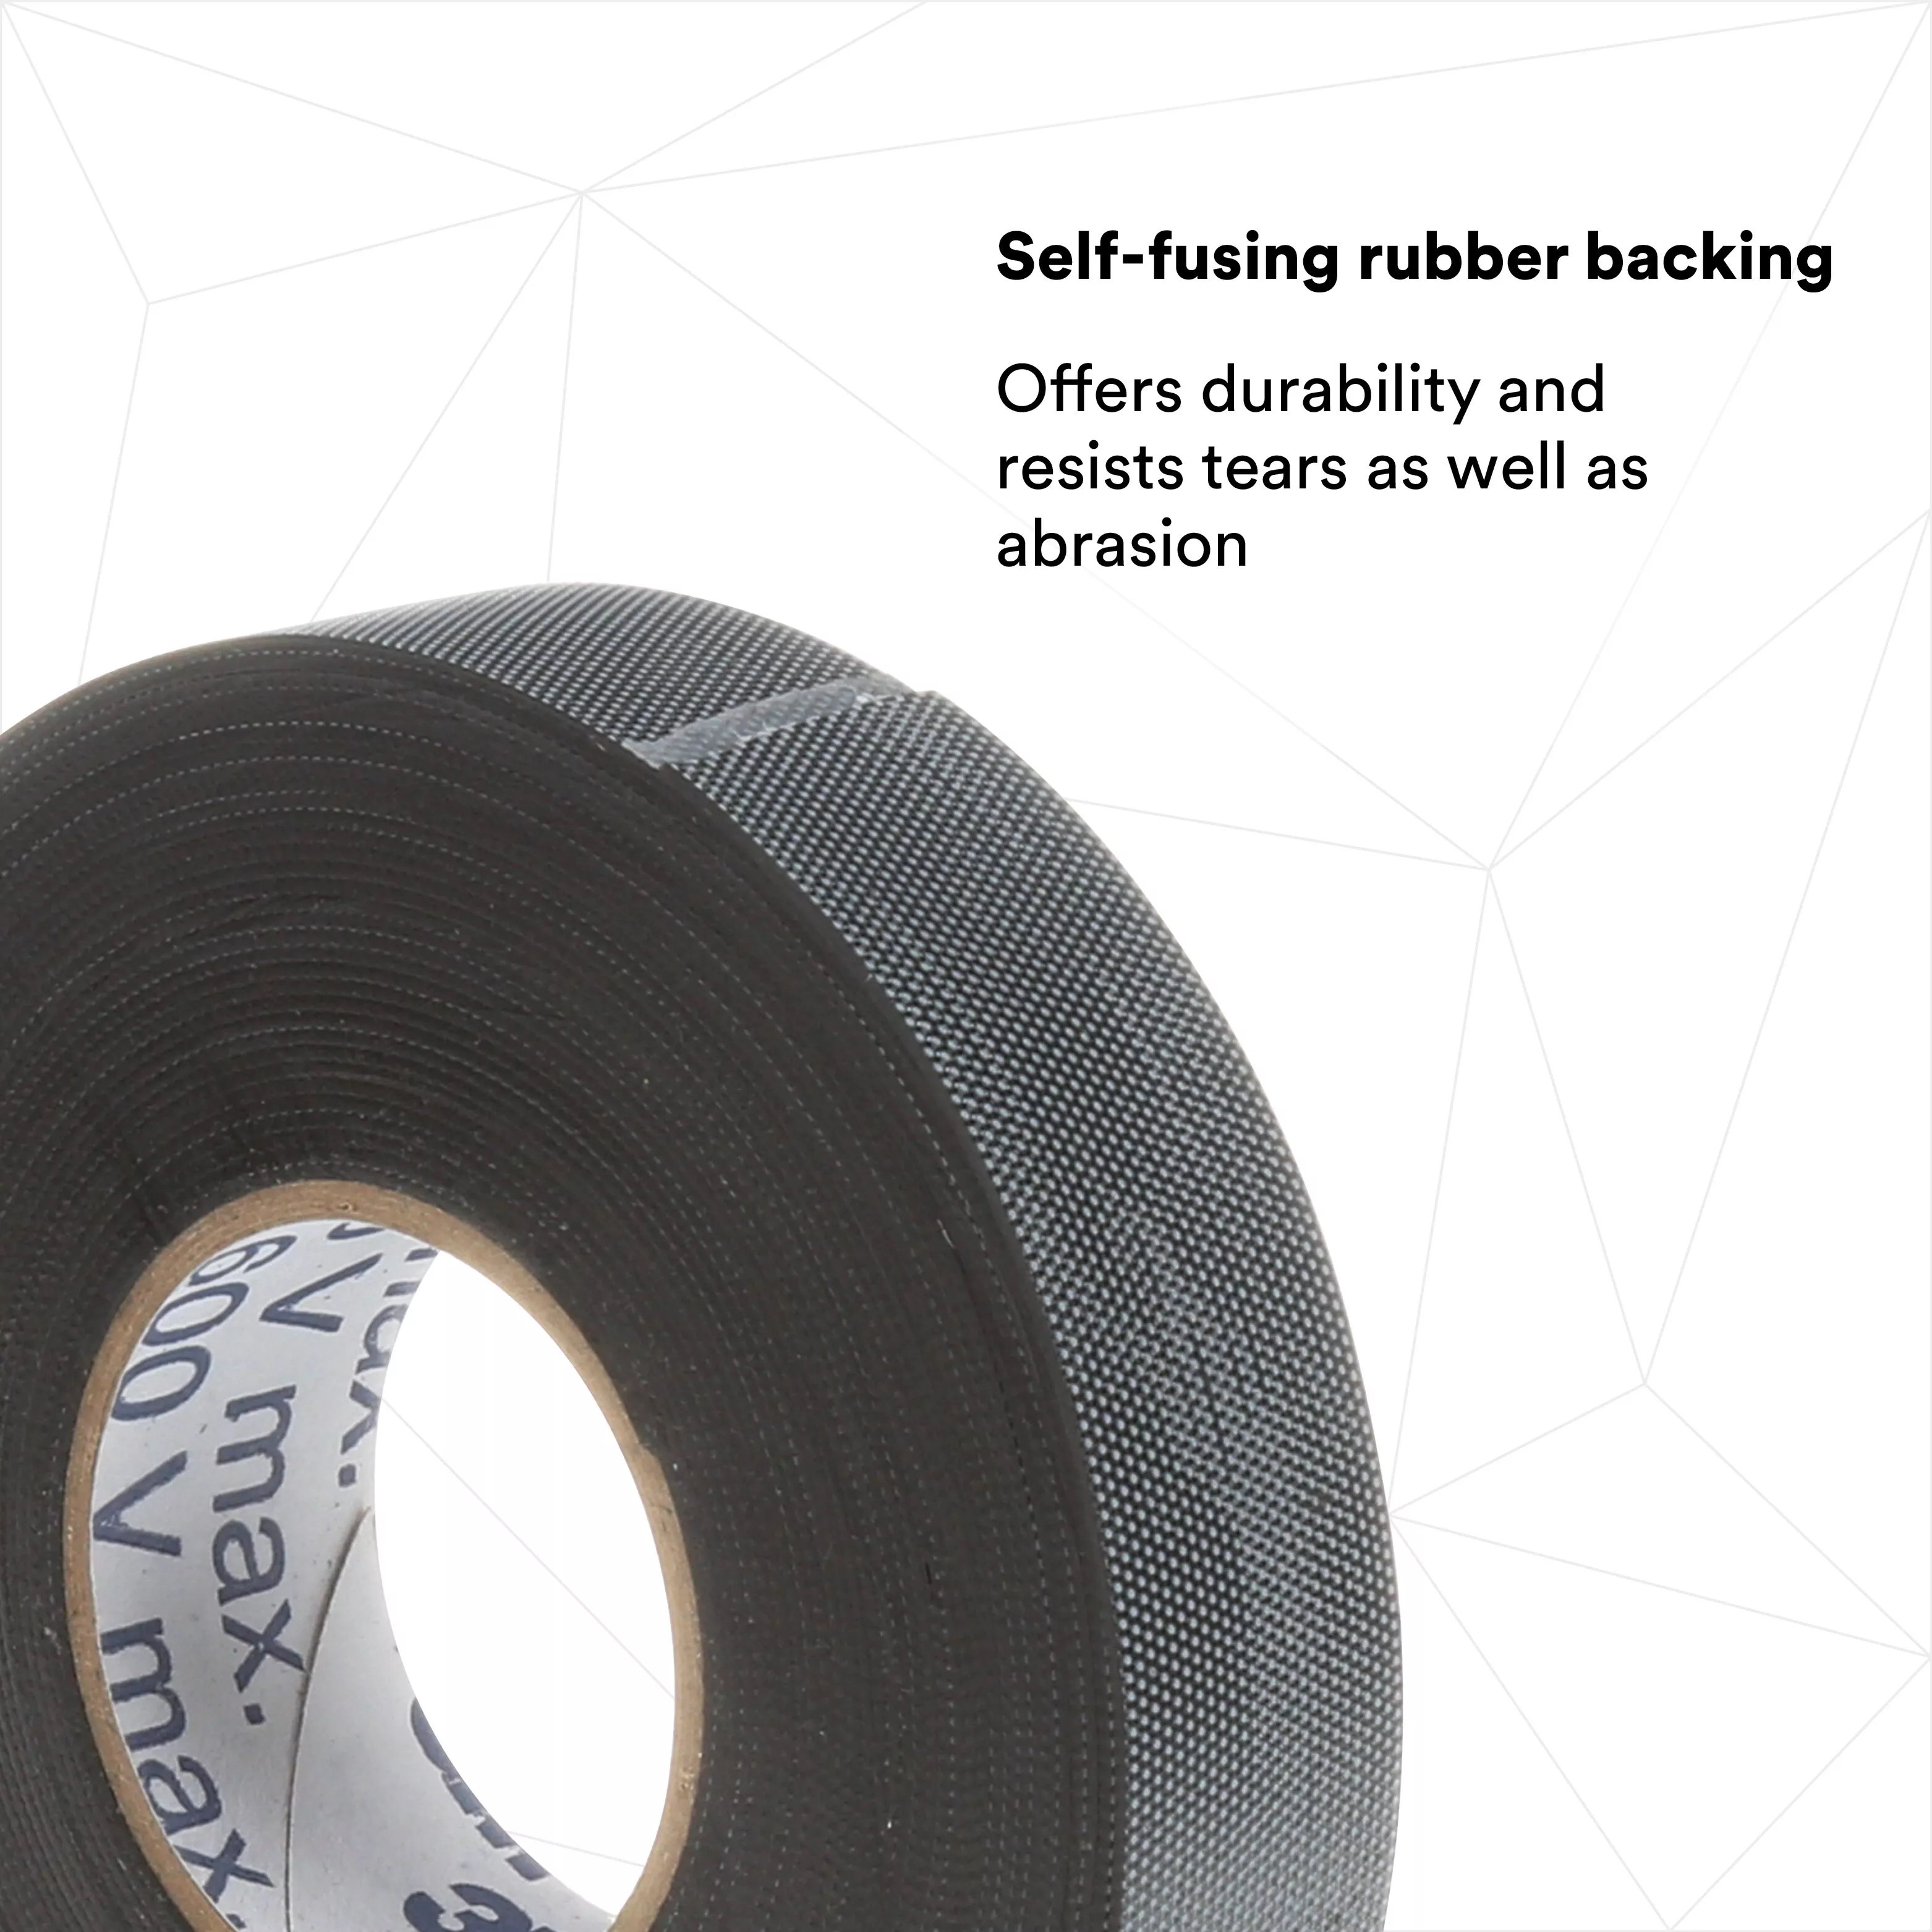 Product Number 2155-3/4X22FT | 3M™ Temflex™ Rubber Splicing Tape 2155